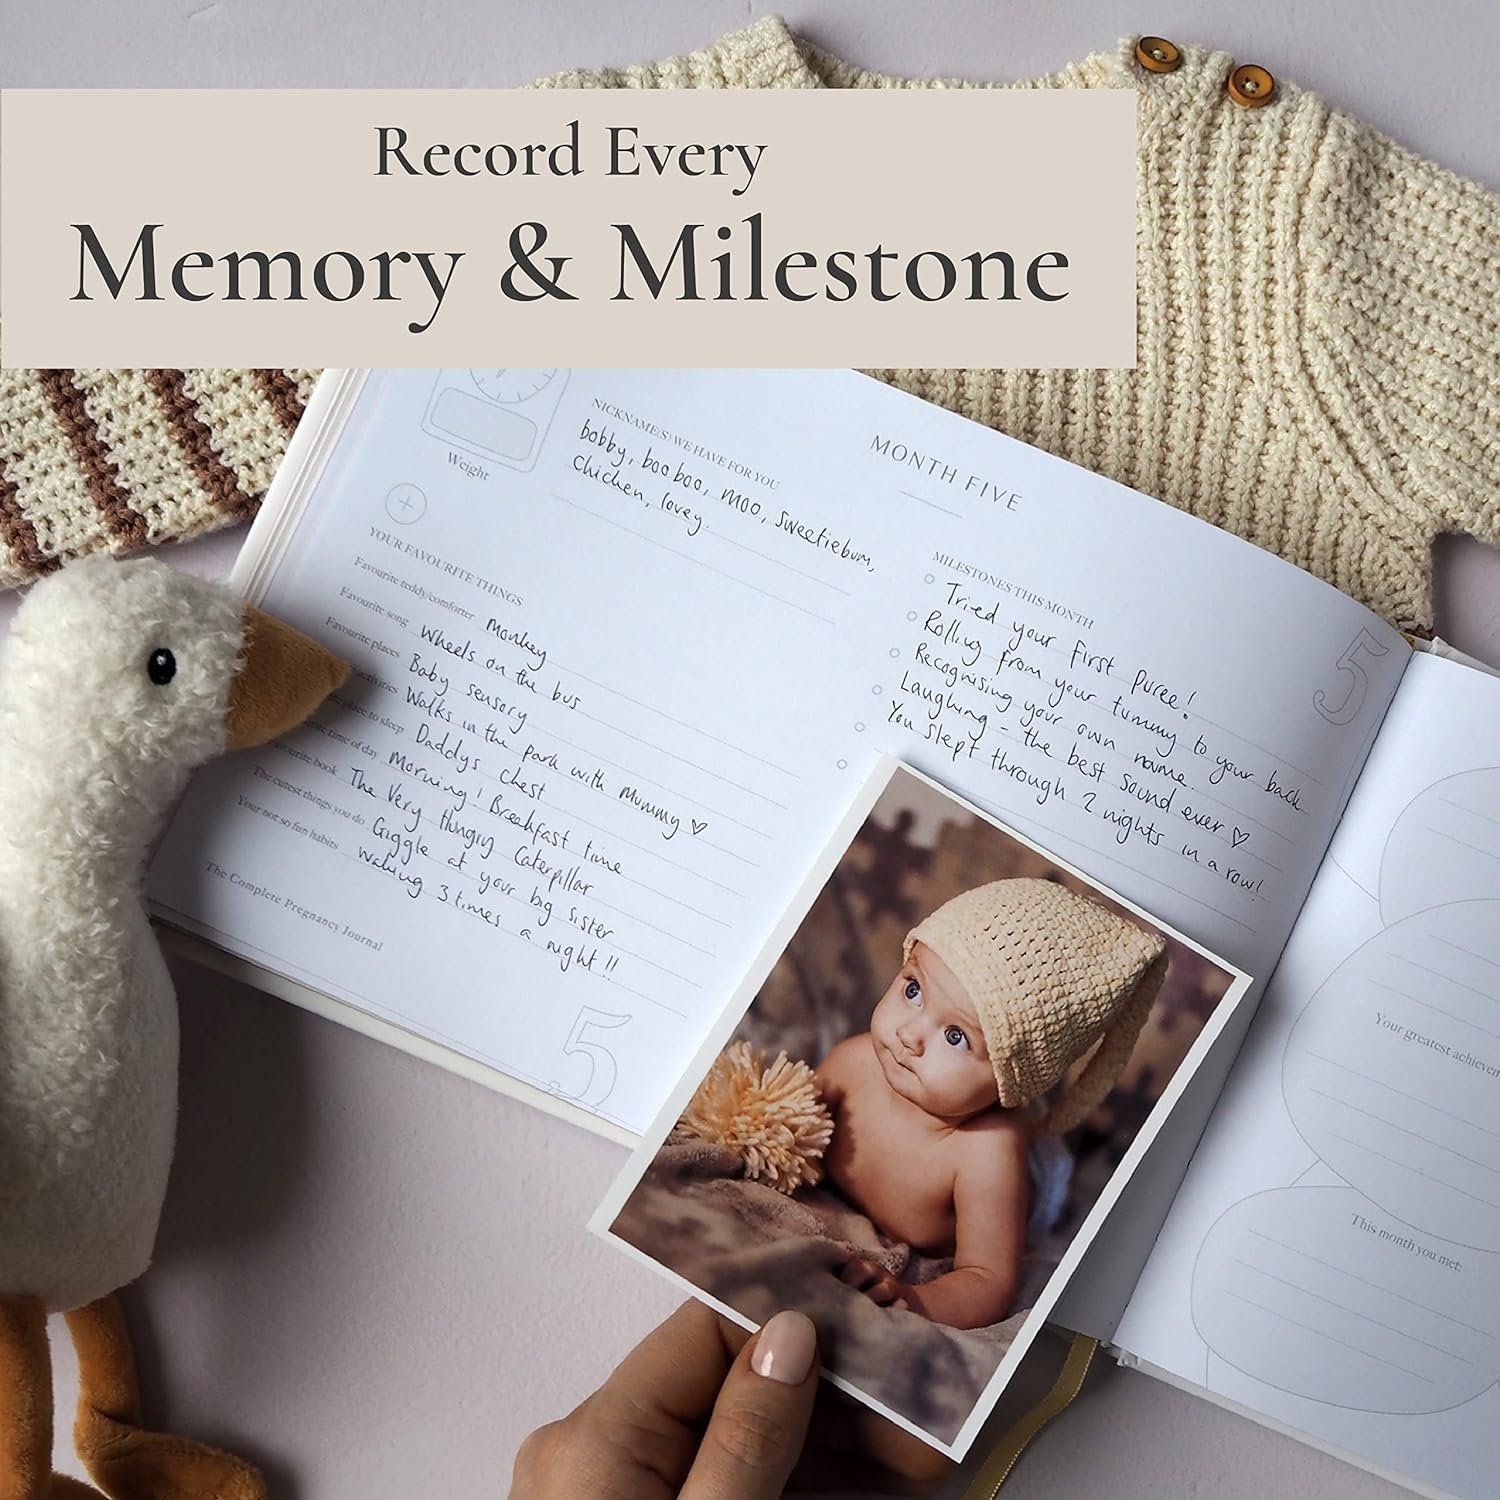 Pregnancy Journal  Memory Book - Great First Time Mom  Baby Gift - Keepsake Pregnancy Book  Journals - 40 Weekly Calendars Milestone Journey - For Ultrasound Photos  Tracking